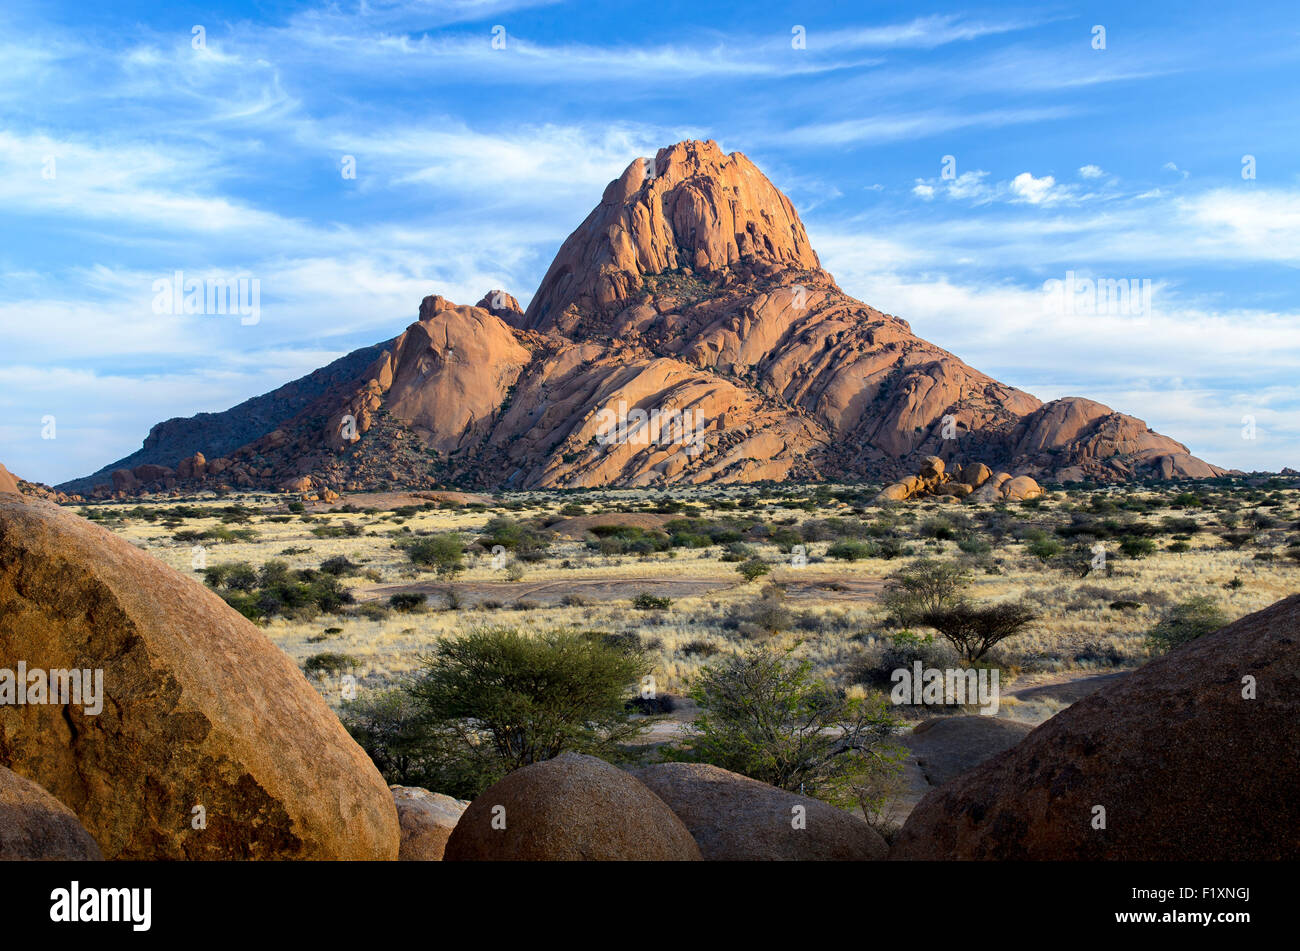 Spitzkoppe view from South Stock Photo